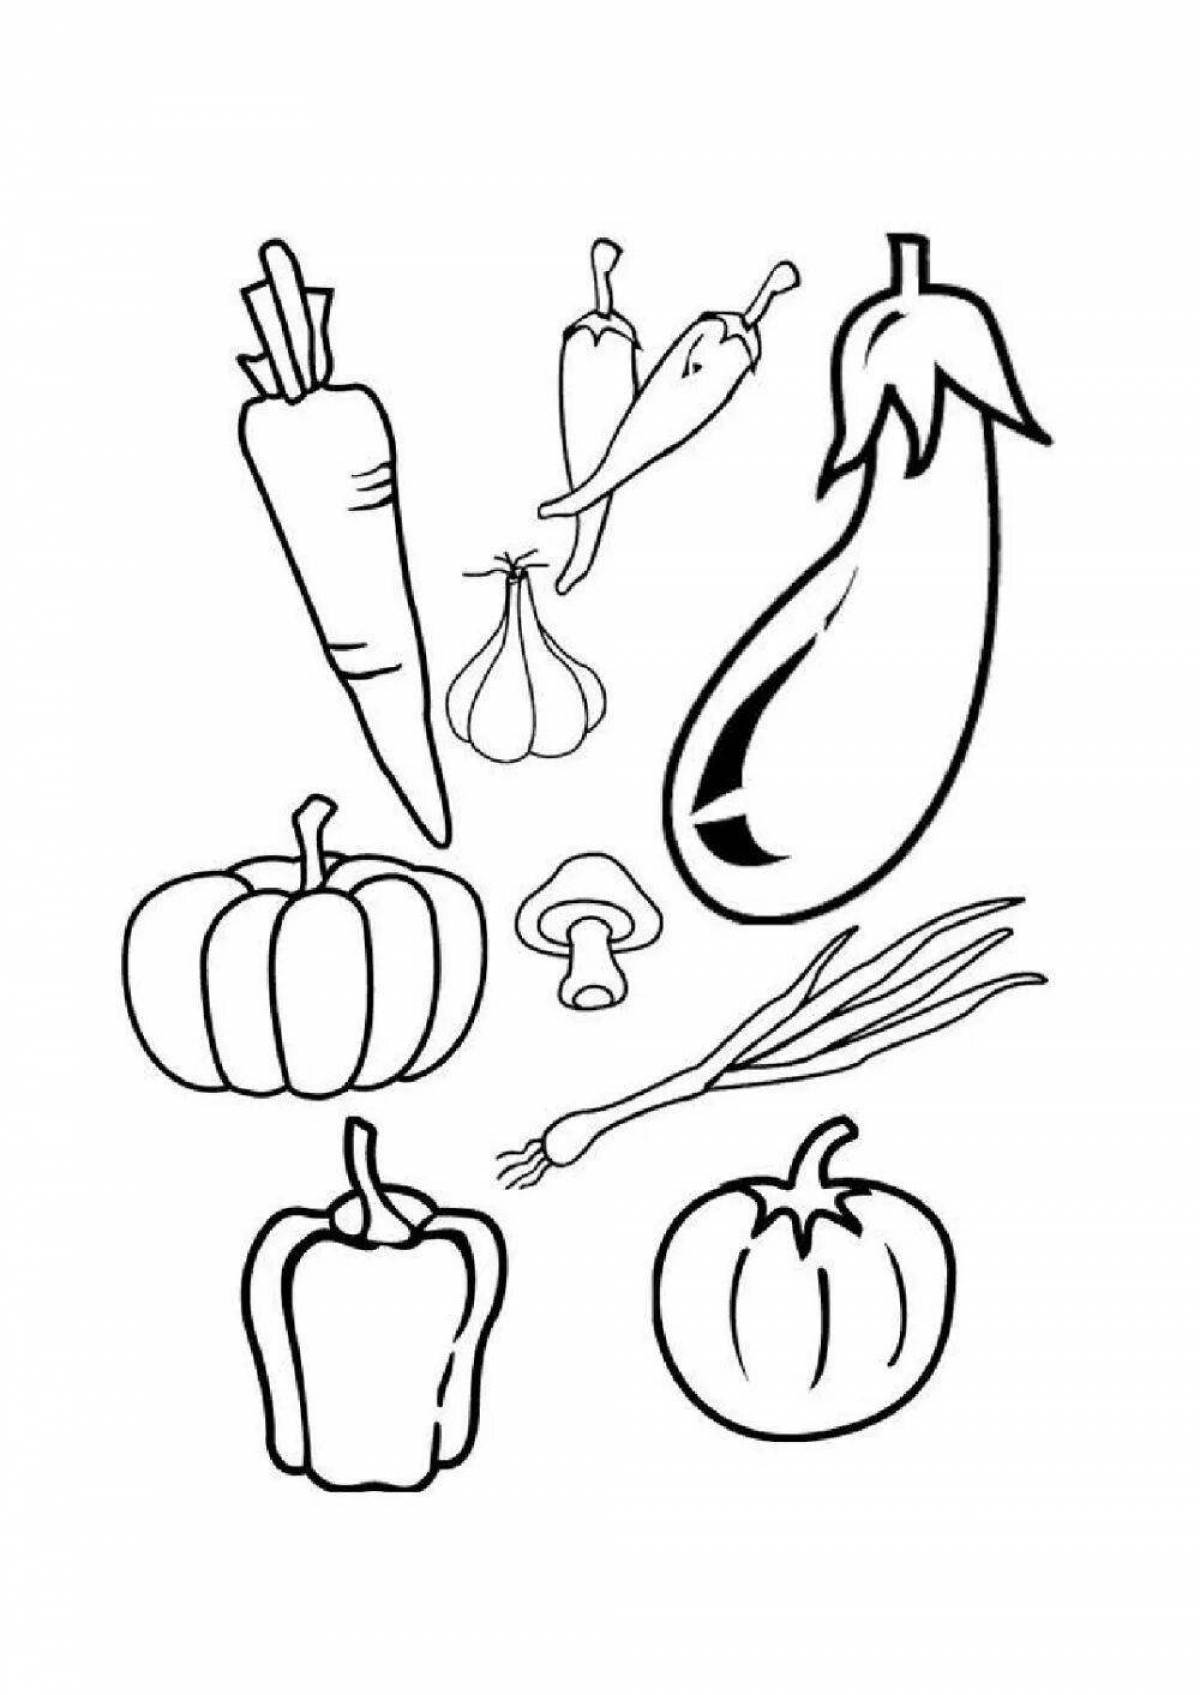 Fun coloring of vegetables for children 4-5 years old